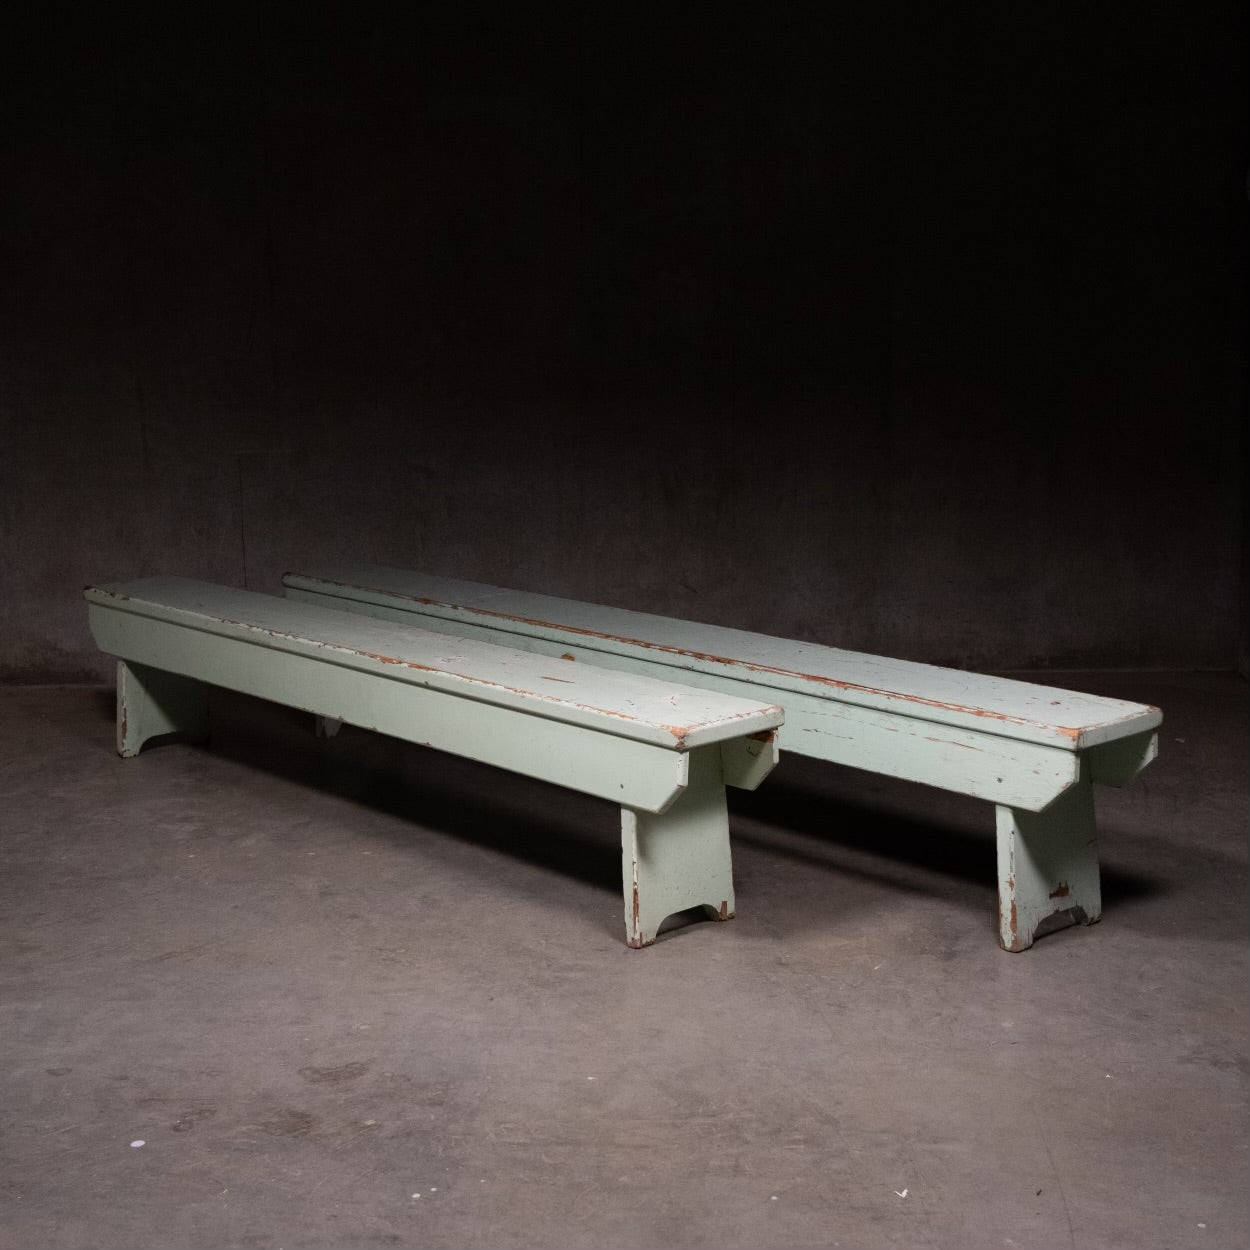 1920-30.  Wooden country benches